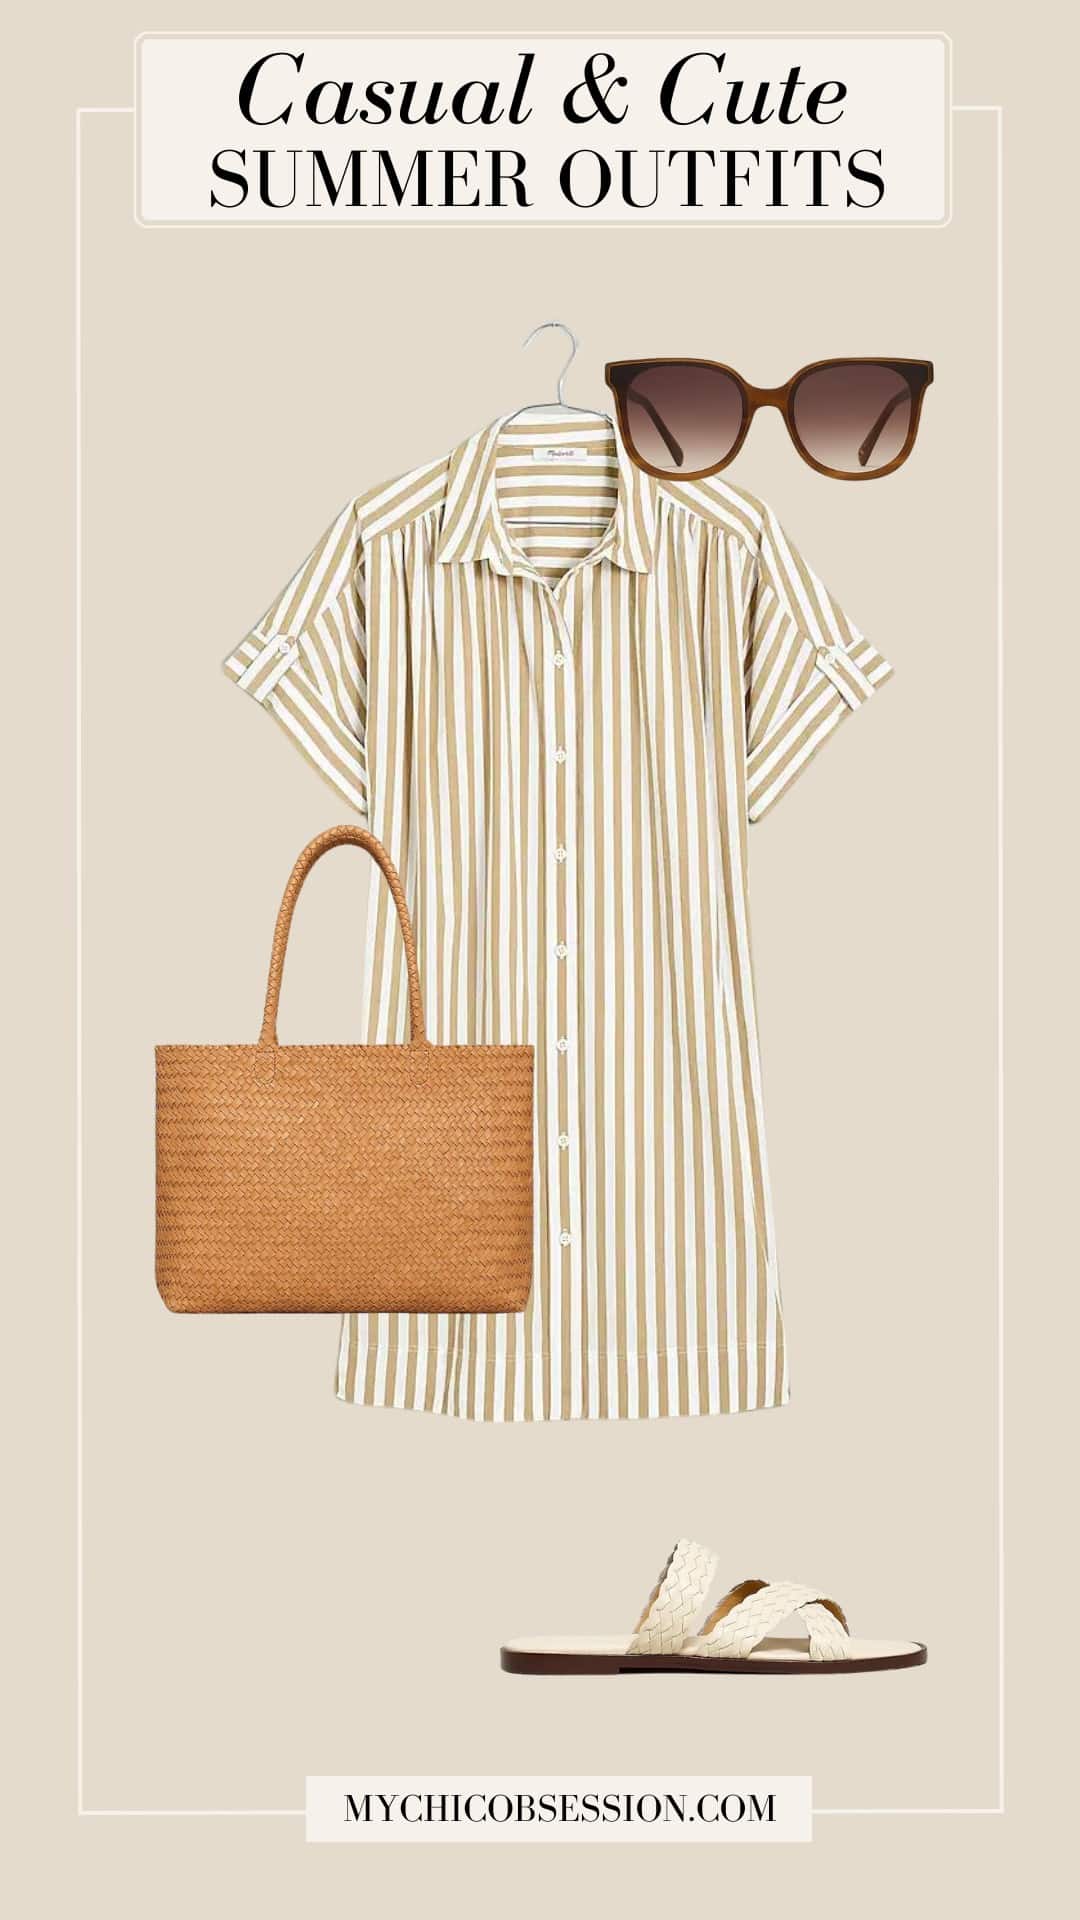 casual cute summer outfits - shirtdress woven tote bag sunglasses sandals